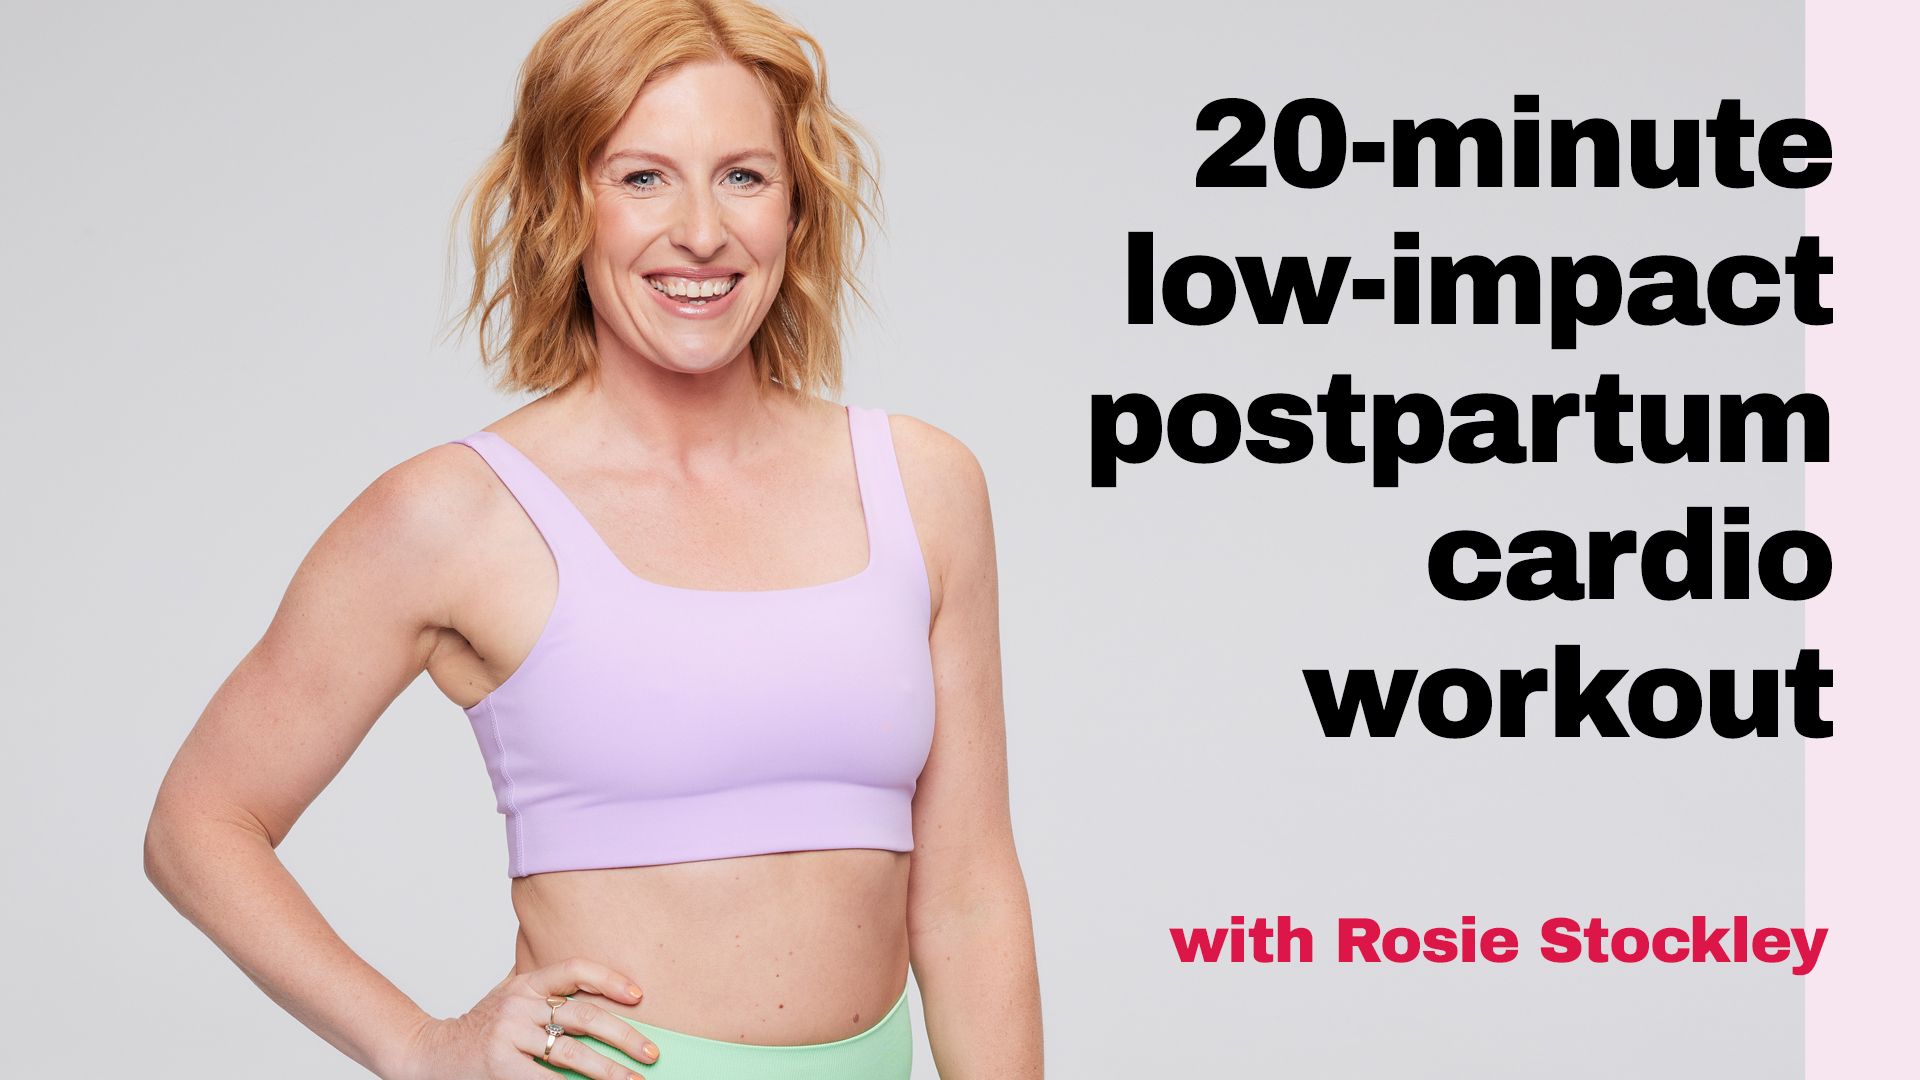 https://hips.hearstapps.com/hmg-prod/images/20-min-low-impact-postpartum-cardio-workout-with-rosie-stockley-6576d527caa62.jpg